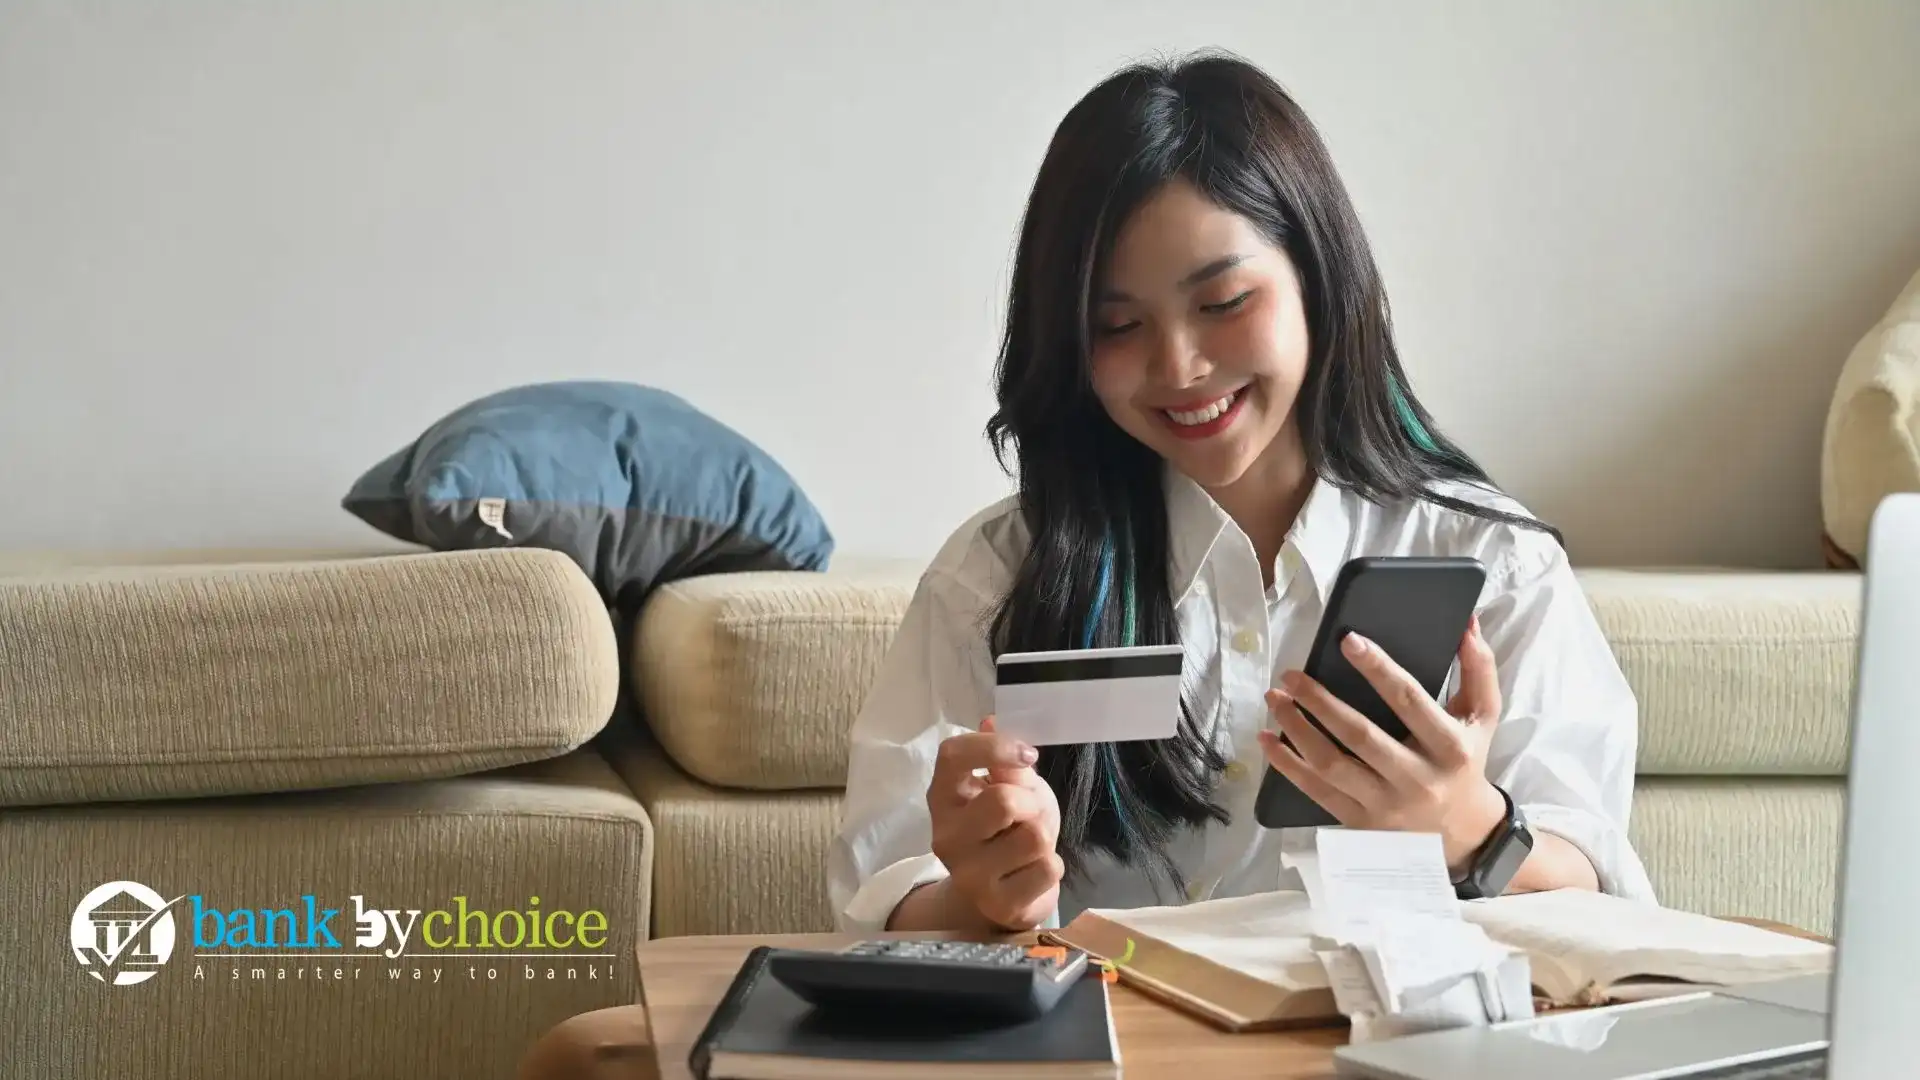 Credit card bill payment online- Bankbychoice